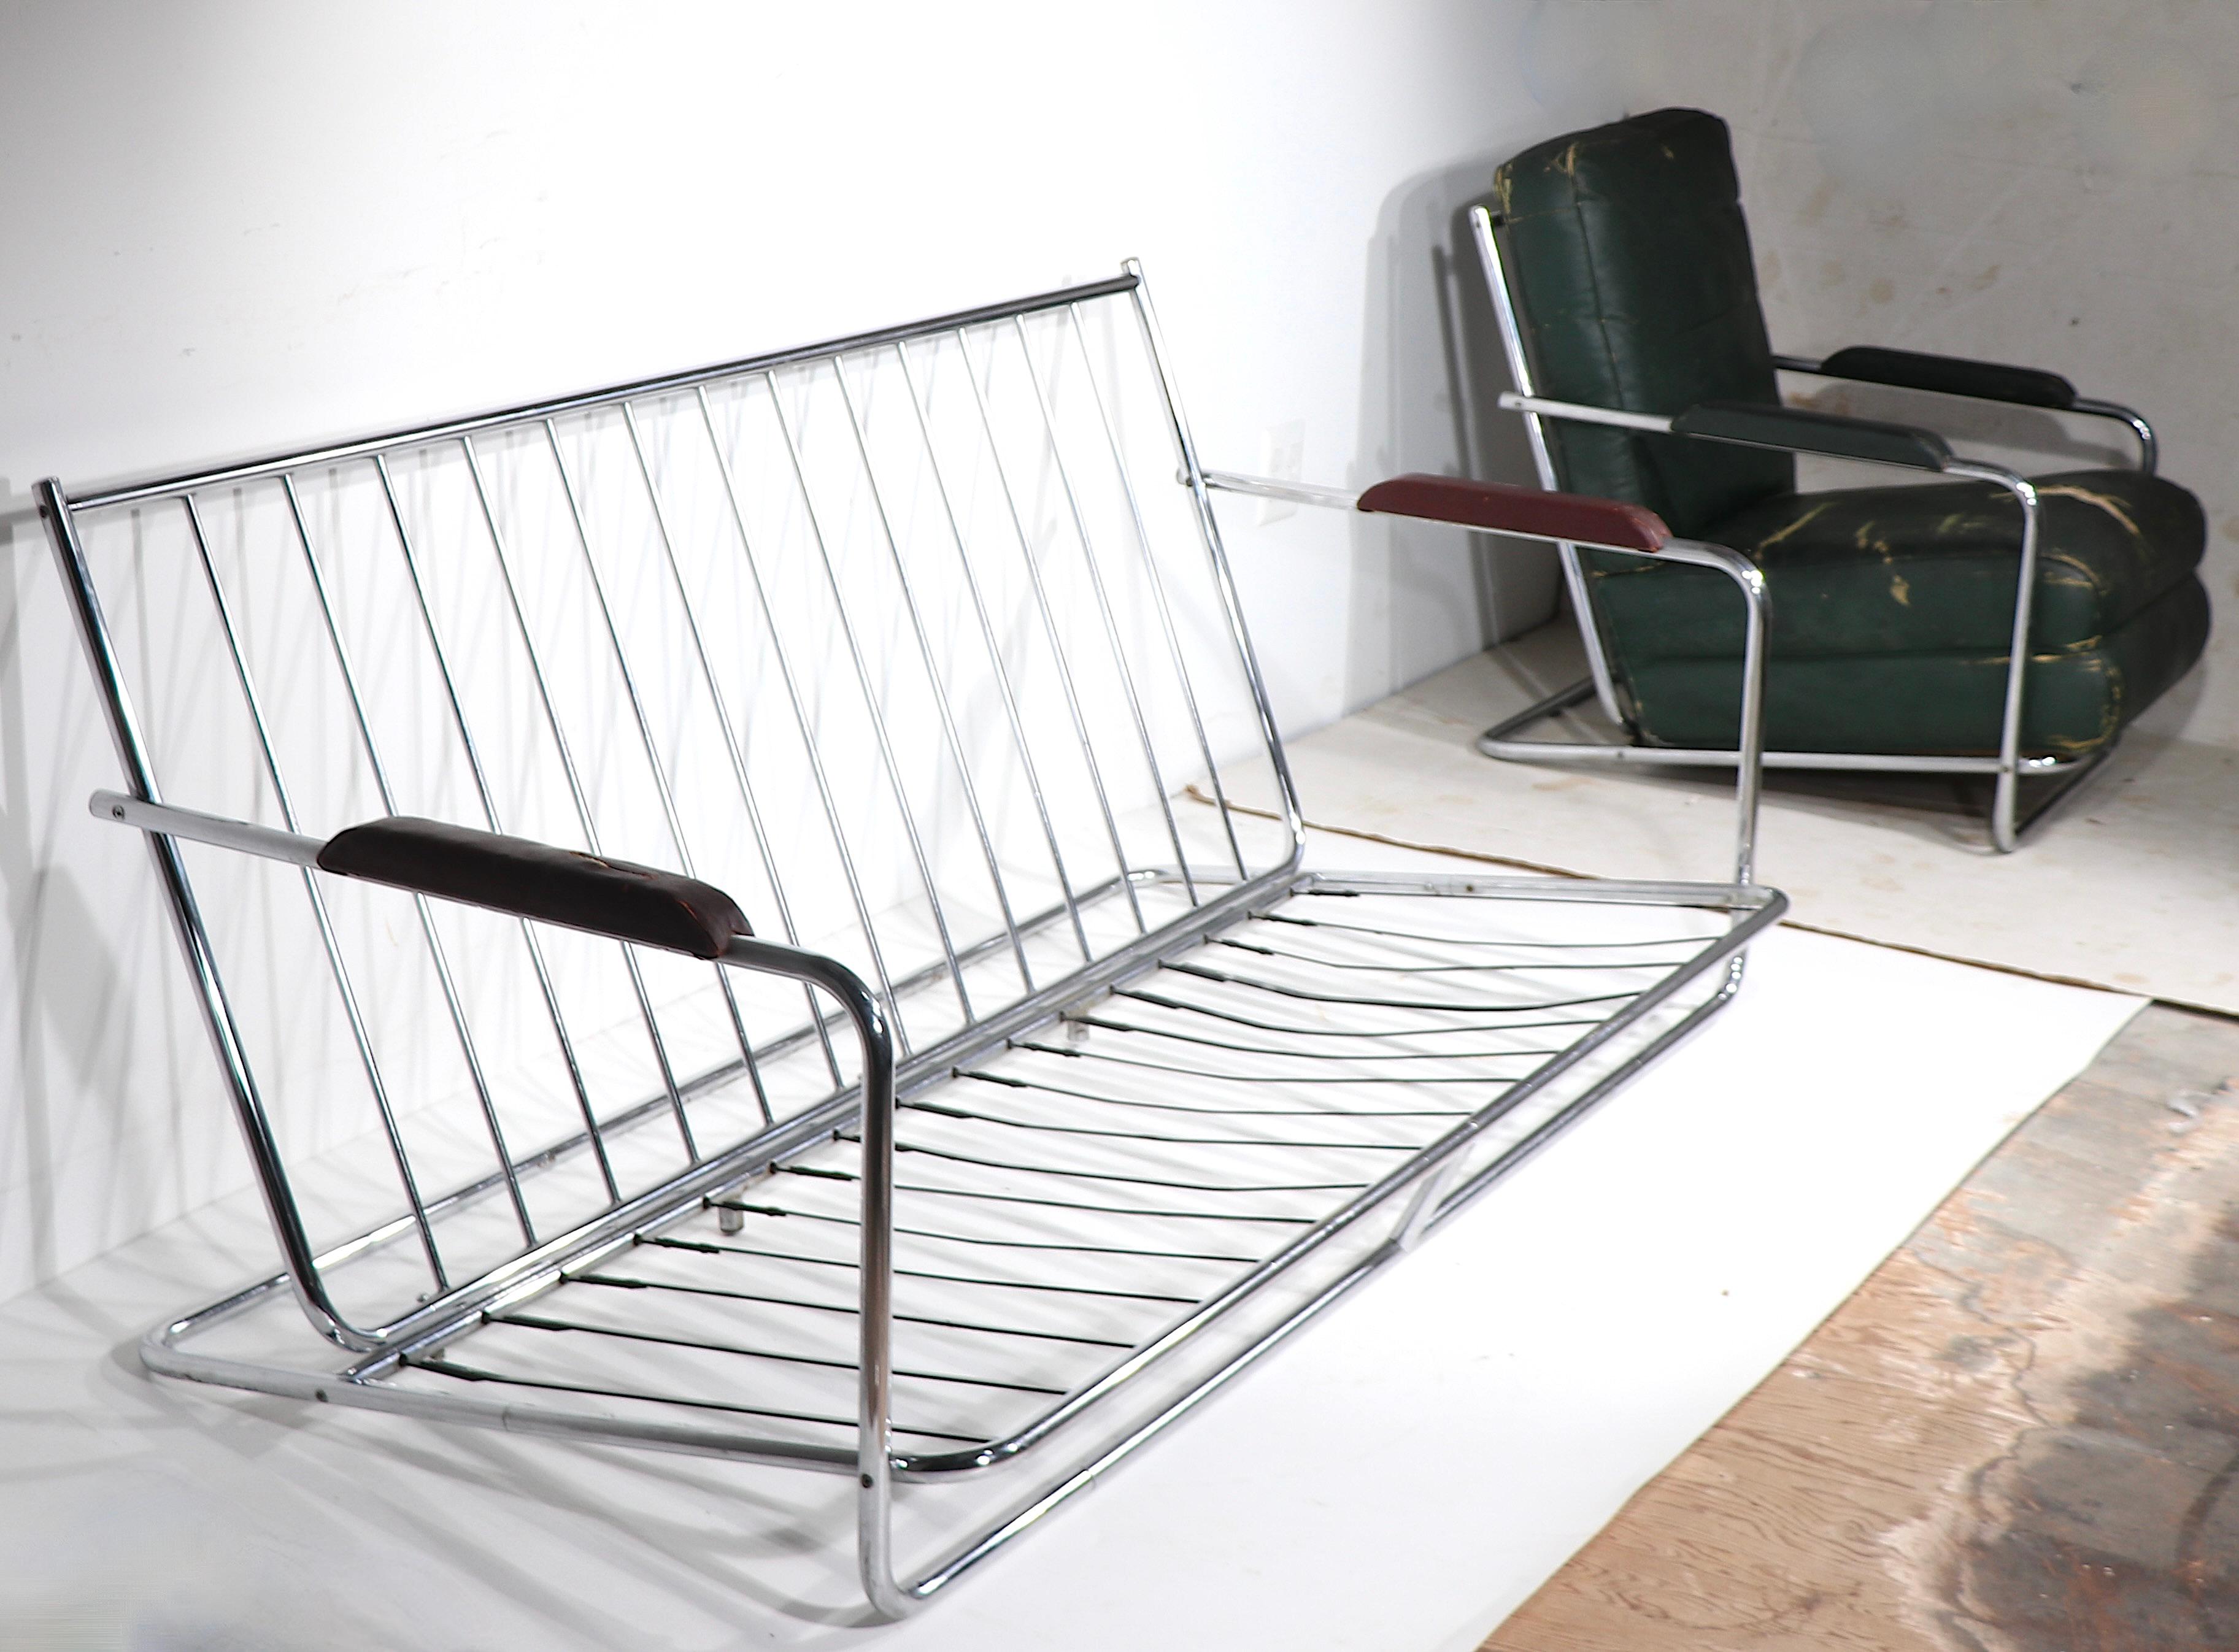 Iconic Art Deco Machine Age sofa designed by Gilbert Rohde for the Troy Sunshade Company, circa 1930's. The couch features a sexy tubular chrome frame, with thick cushions. This classic design still looks modern and relevant almost 100 years after